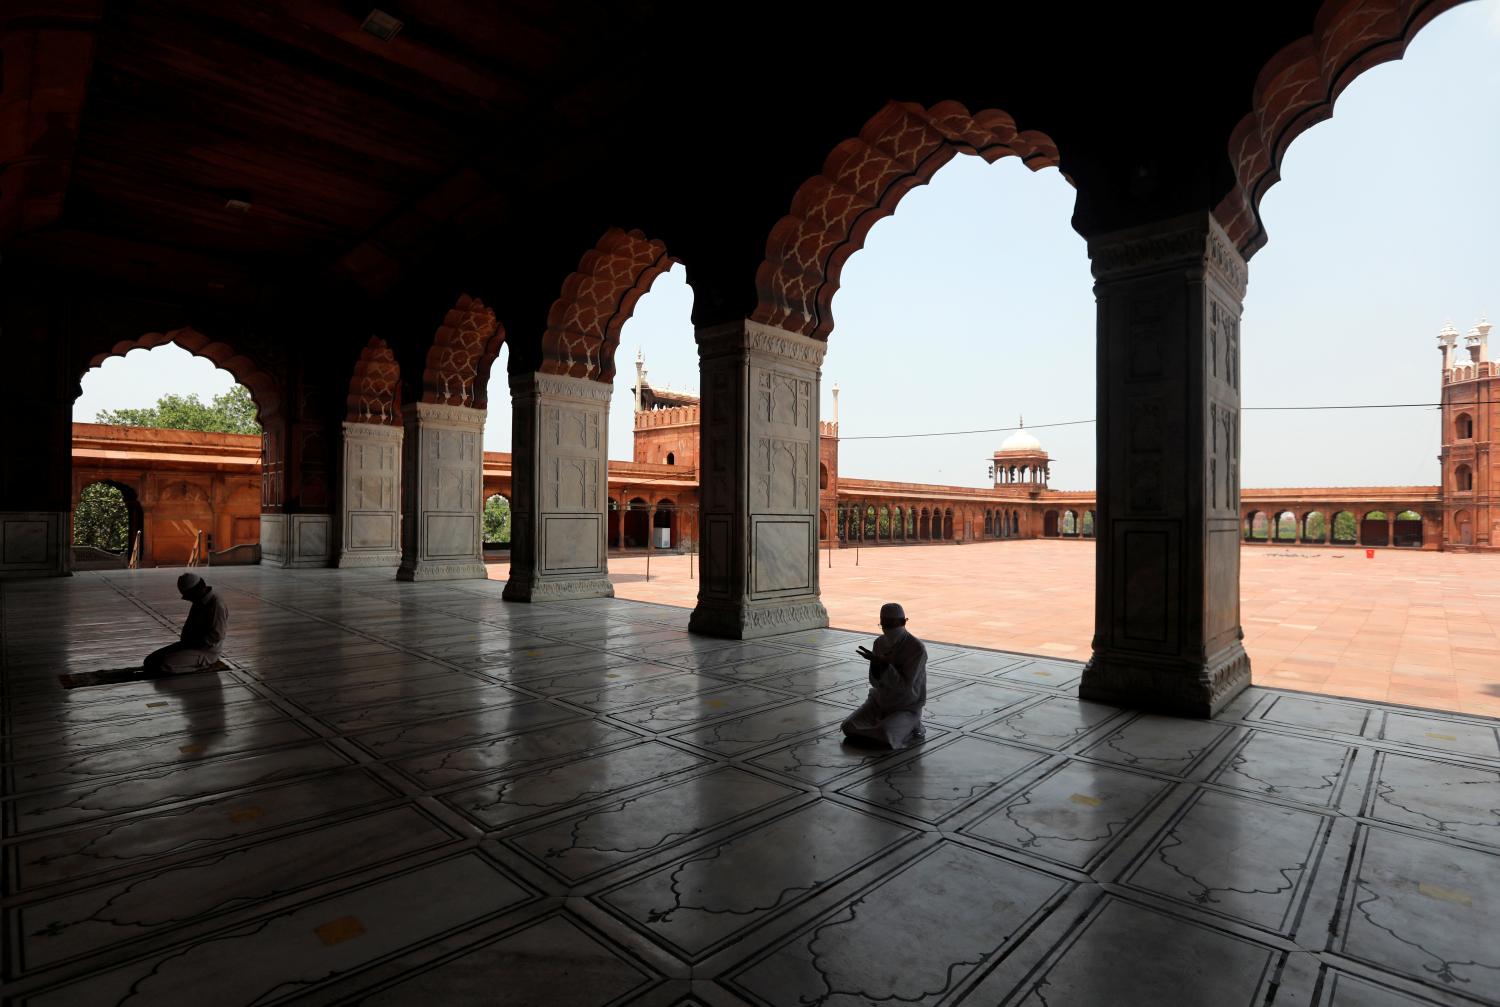 Muslims pray inside Jama Masjid after the opening of most of the religious places as India eases lockdown restrictions that were imposed to slow the spread of the coronavirus disease (COVID-19), in the old quarters of Delhi, India, June 8, 2020. REUTERS/Anushree Fadnavis